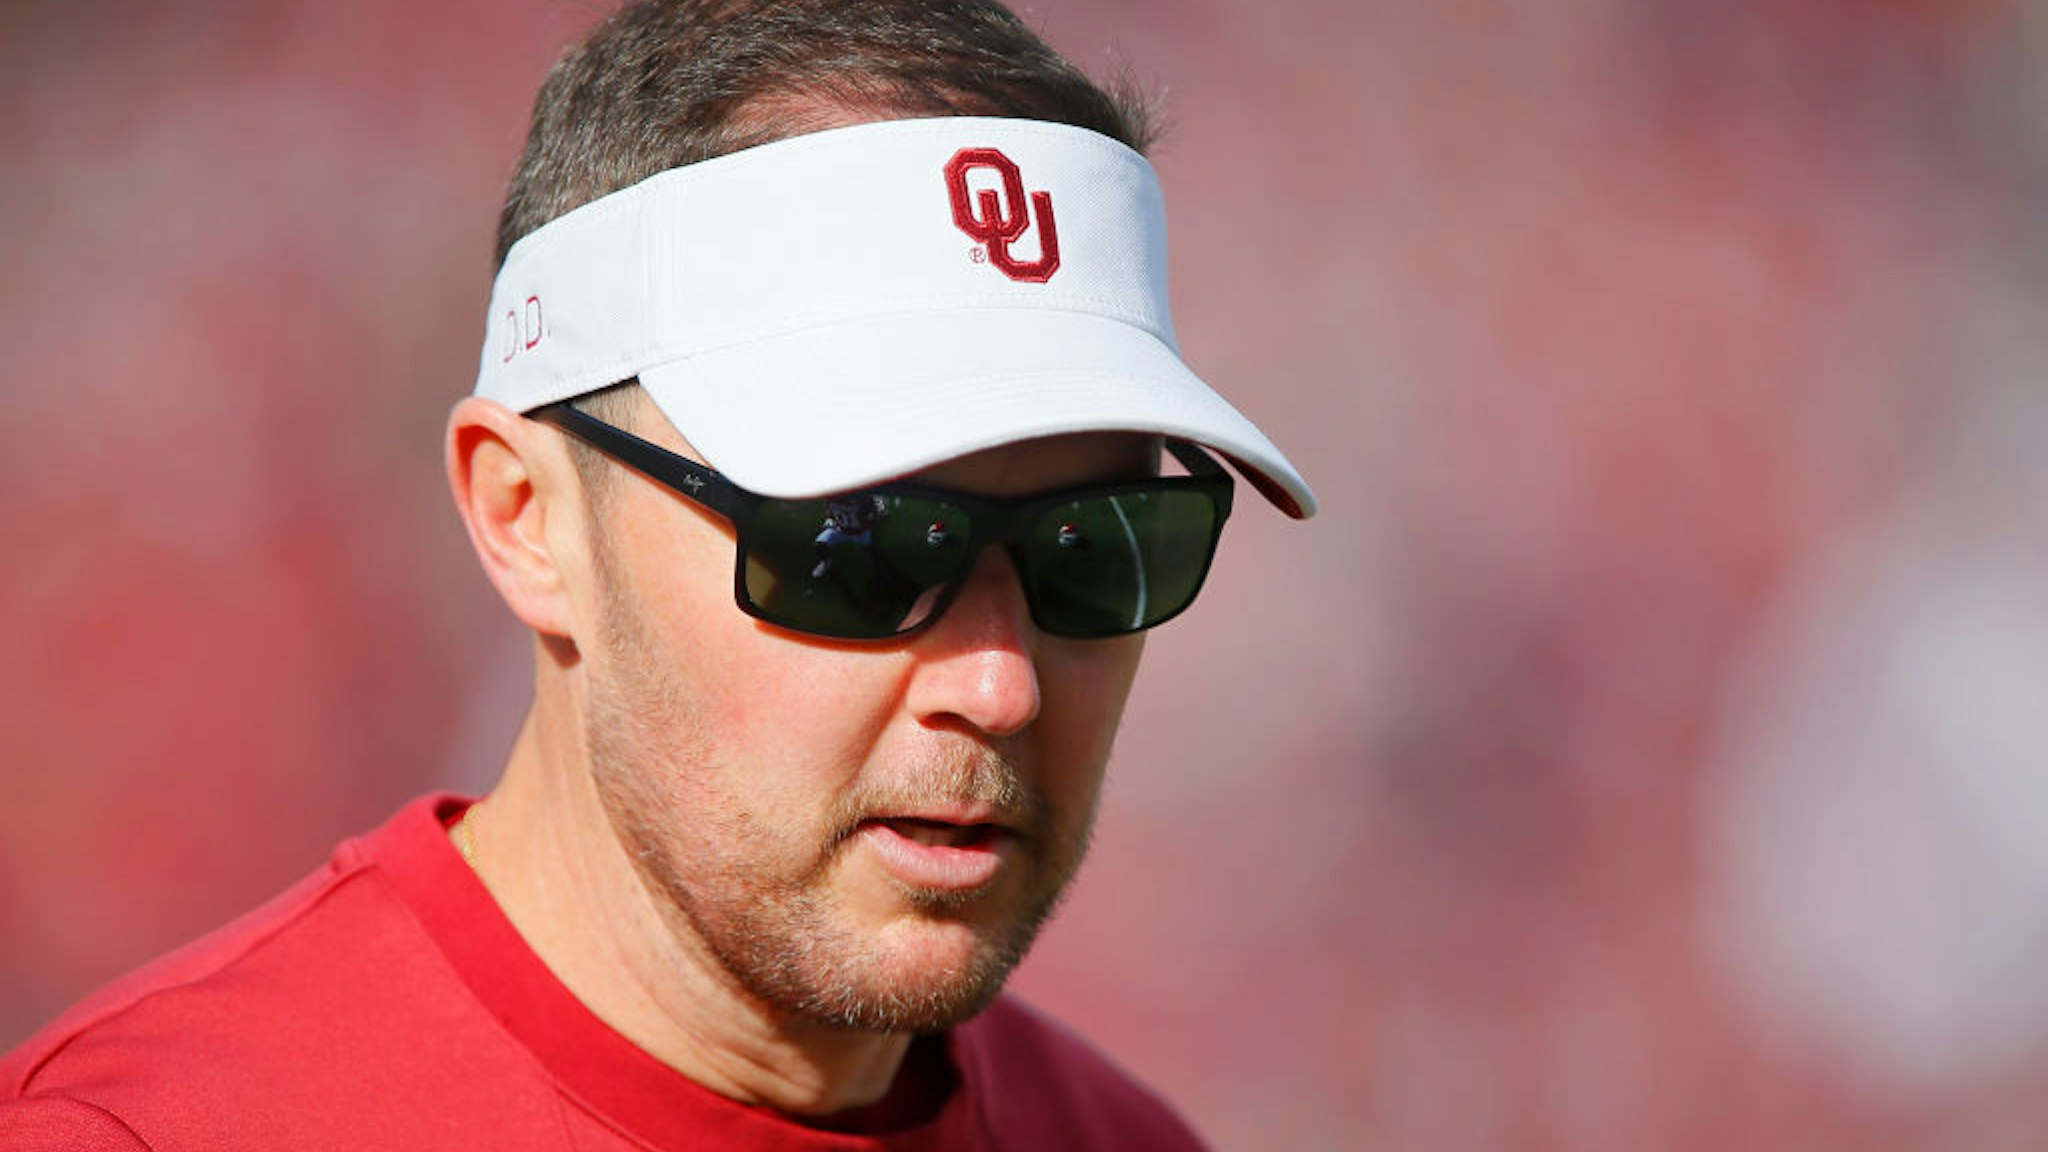 NORMAN, OK - NOVEMBER 20: Head coach Lincoln Riley of the Oklahoma Sooners greets players before a game against the Iowa State Cyclones at Gaylord Family Oklahoma Memorial Stadium on November 20, 2021 in Norman, Oklahoma. The Sooners won 28-21. (Photo by Brian Bahr/Getty Images)